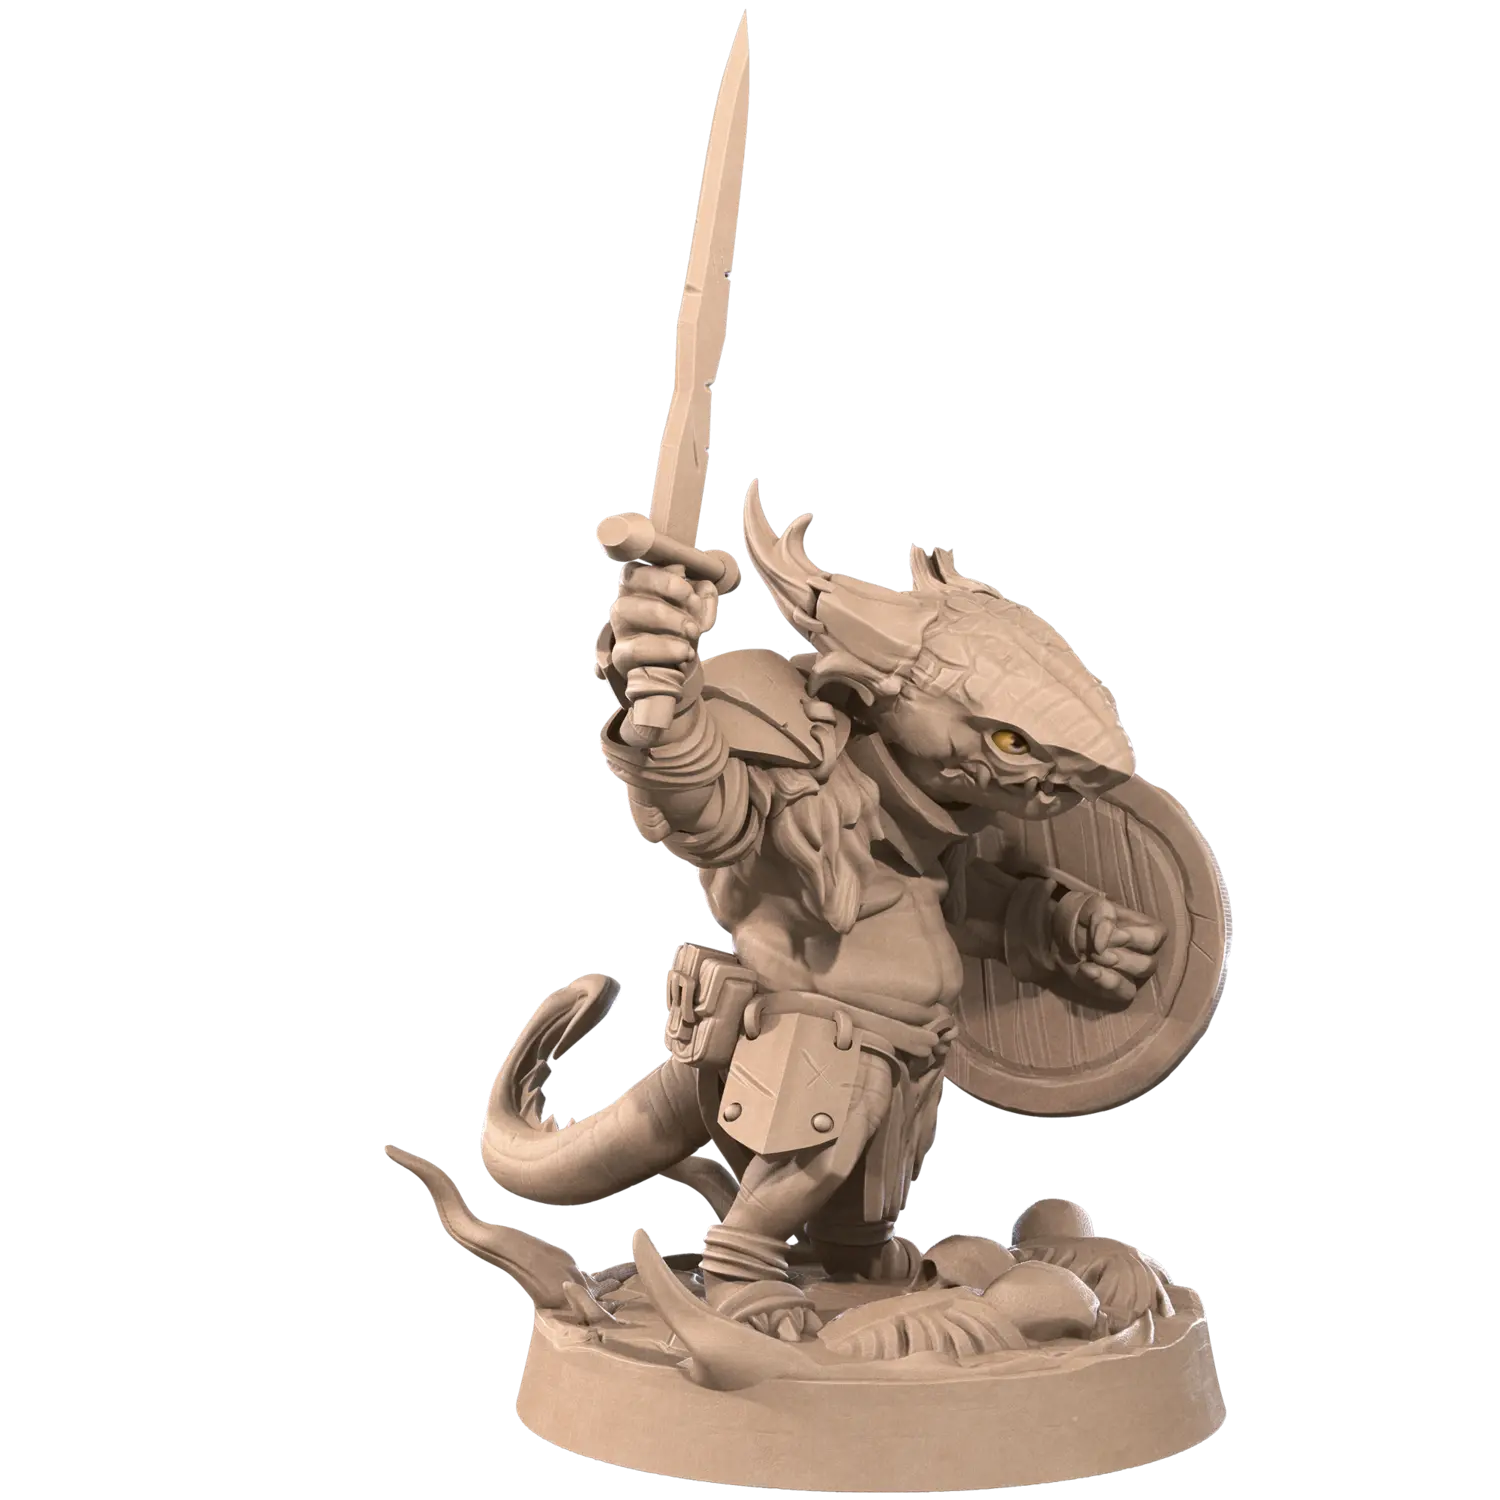 DnD Barbarian - Fighter - Kobold - Miniature - Monsters - Rogue Glimmer  Barbarian - Fighter - Kobold - Miniature - Monsters - Rogue sold by DoubleHitShop